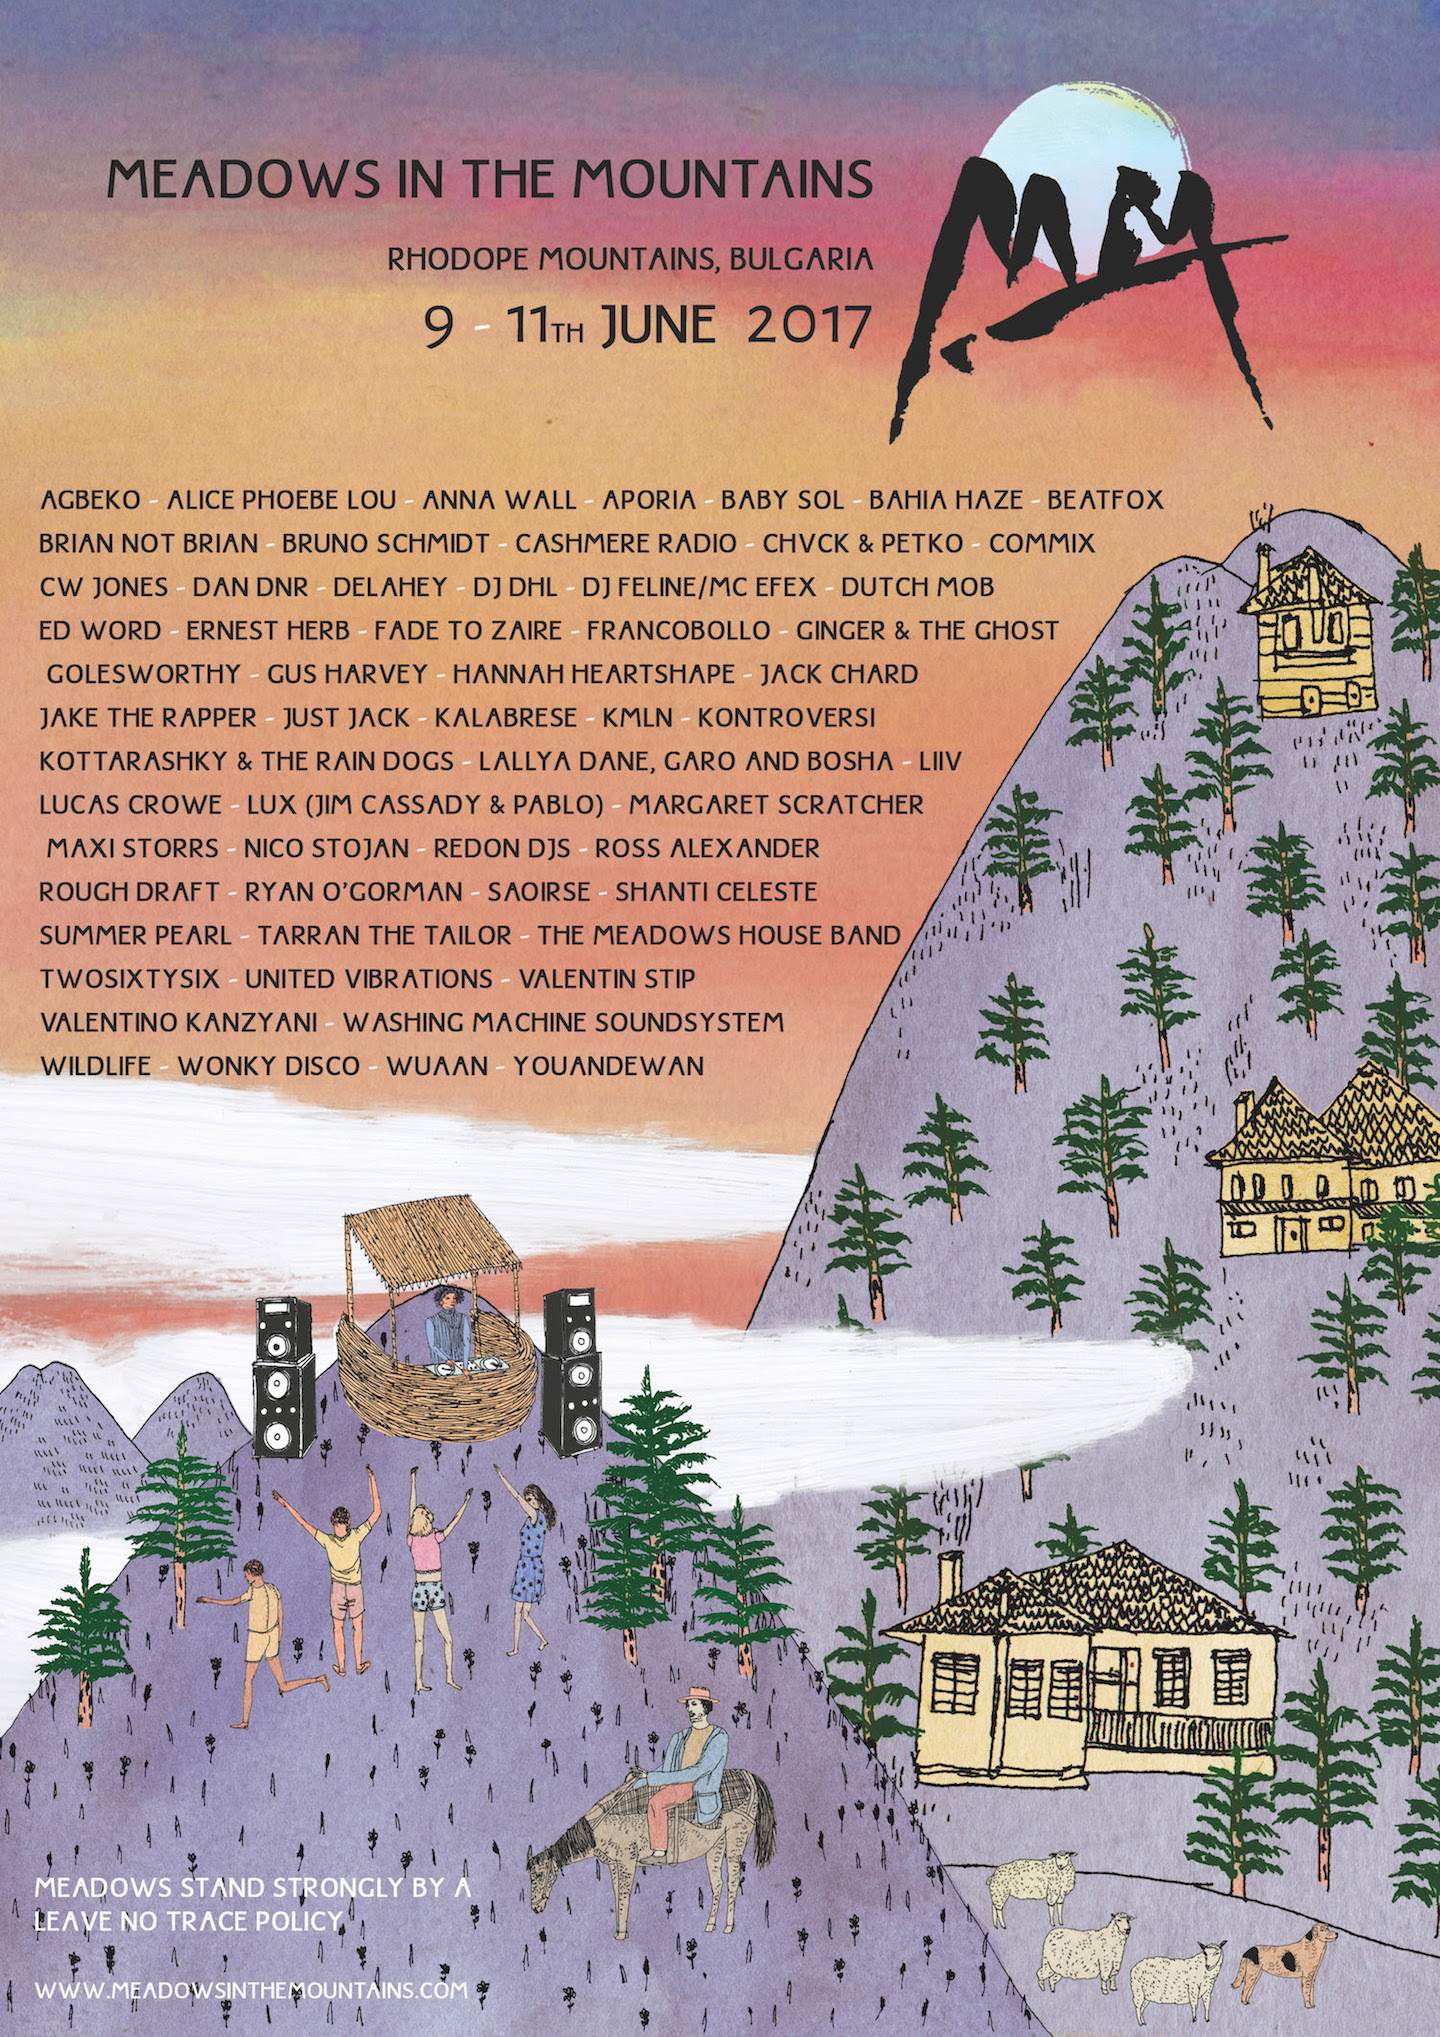 Shanti Celeste, Commix billed for Meadows In The Mountains 2017 image